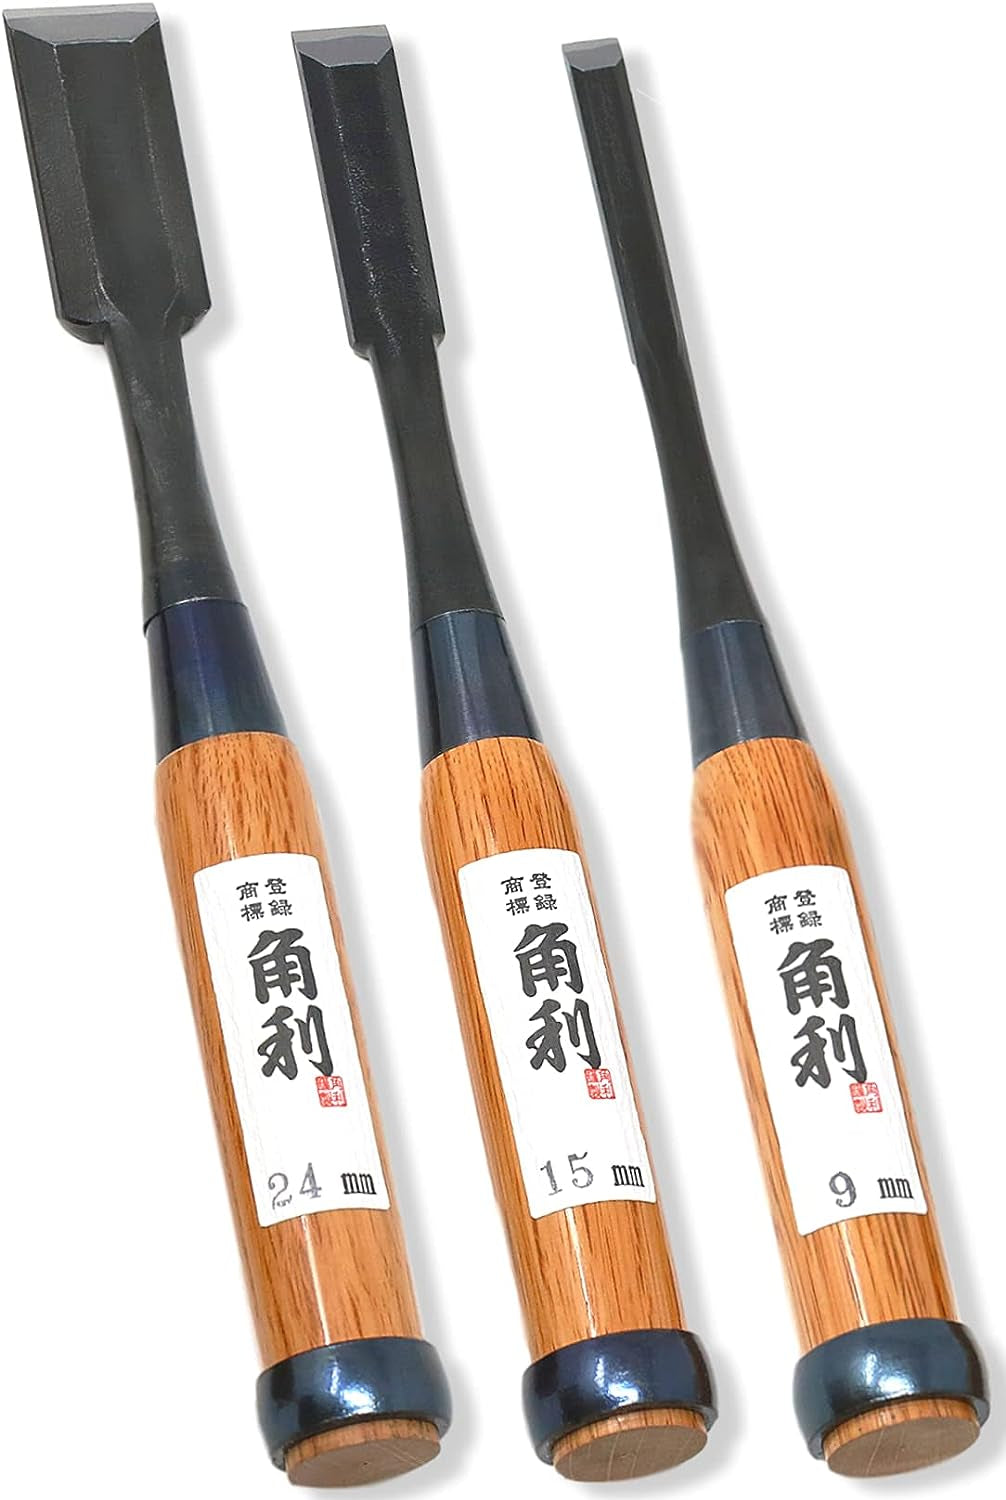 Japanese Wood Chisel Set [Long Handle] 3 Piece for Woodworking, Made in JAPAN, Japanese Oire Nomi for Carve, Mortise, Dovetail, Sharp Japanese Carbon Steel, Red Oak Wood Handle